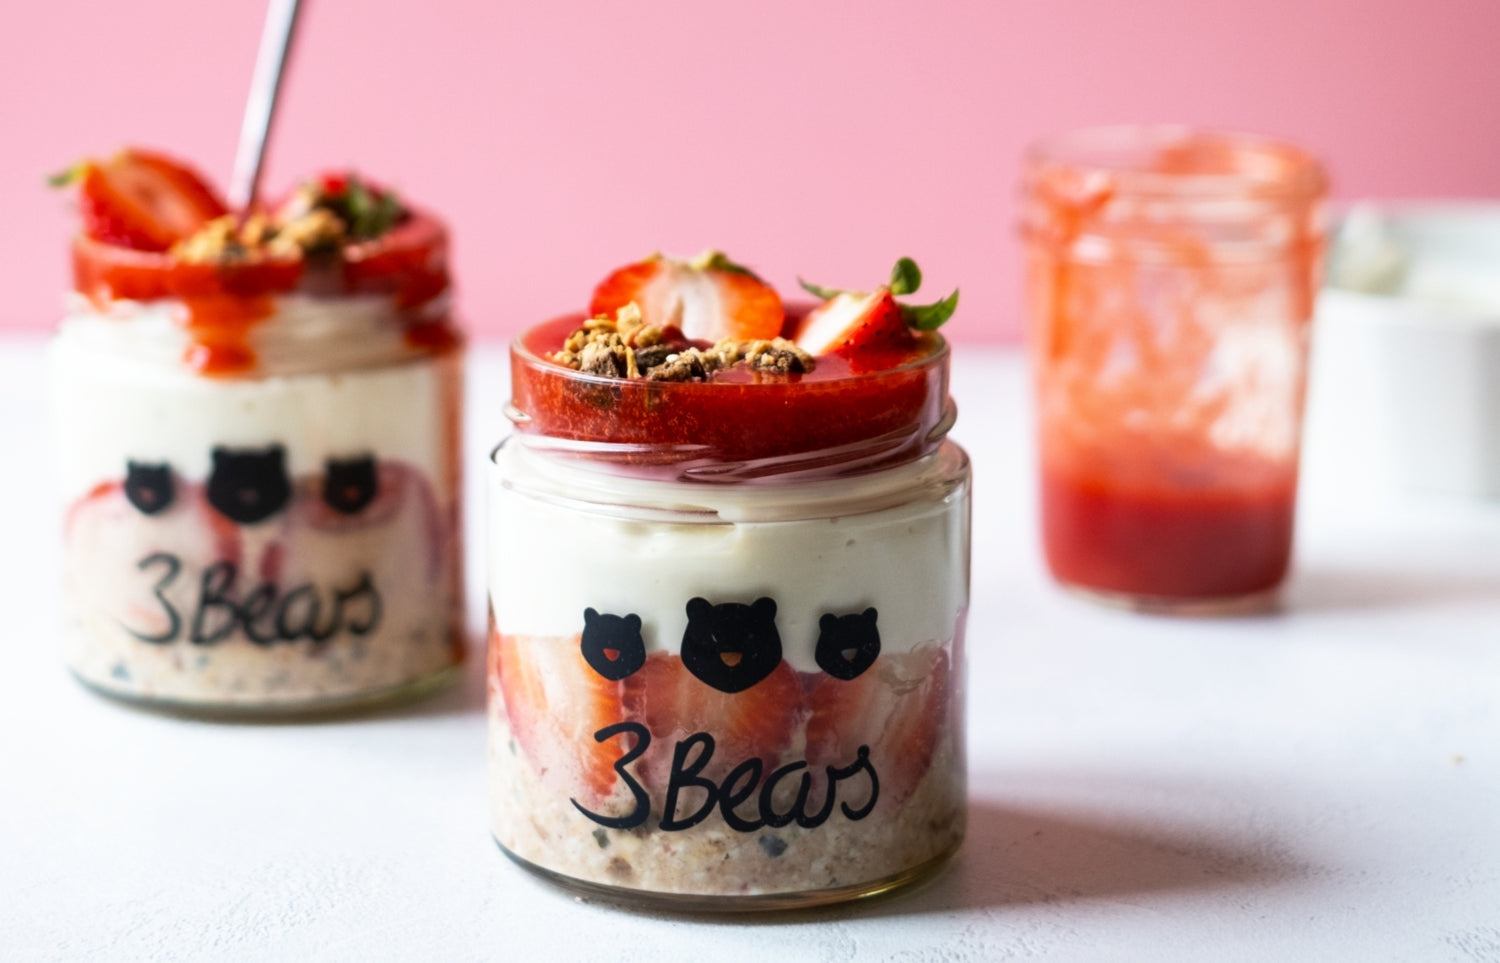 Cheesecake overnight oats with strawberries